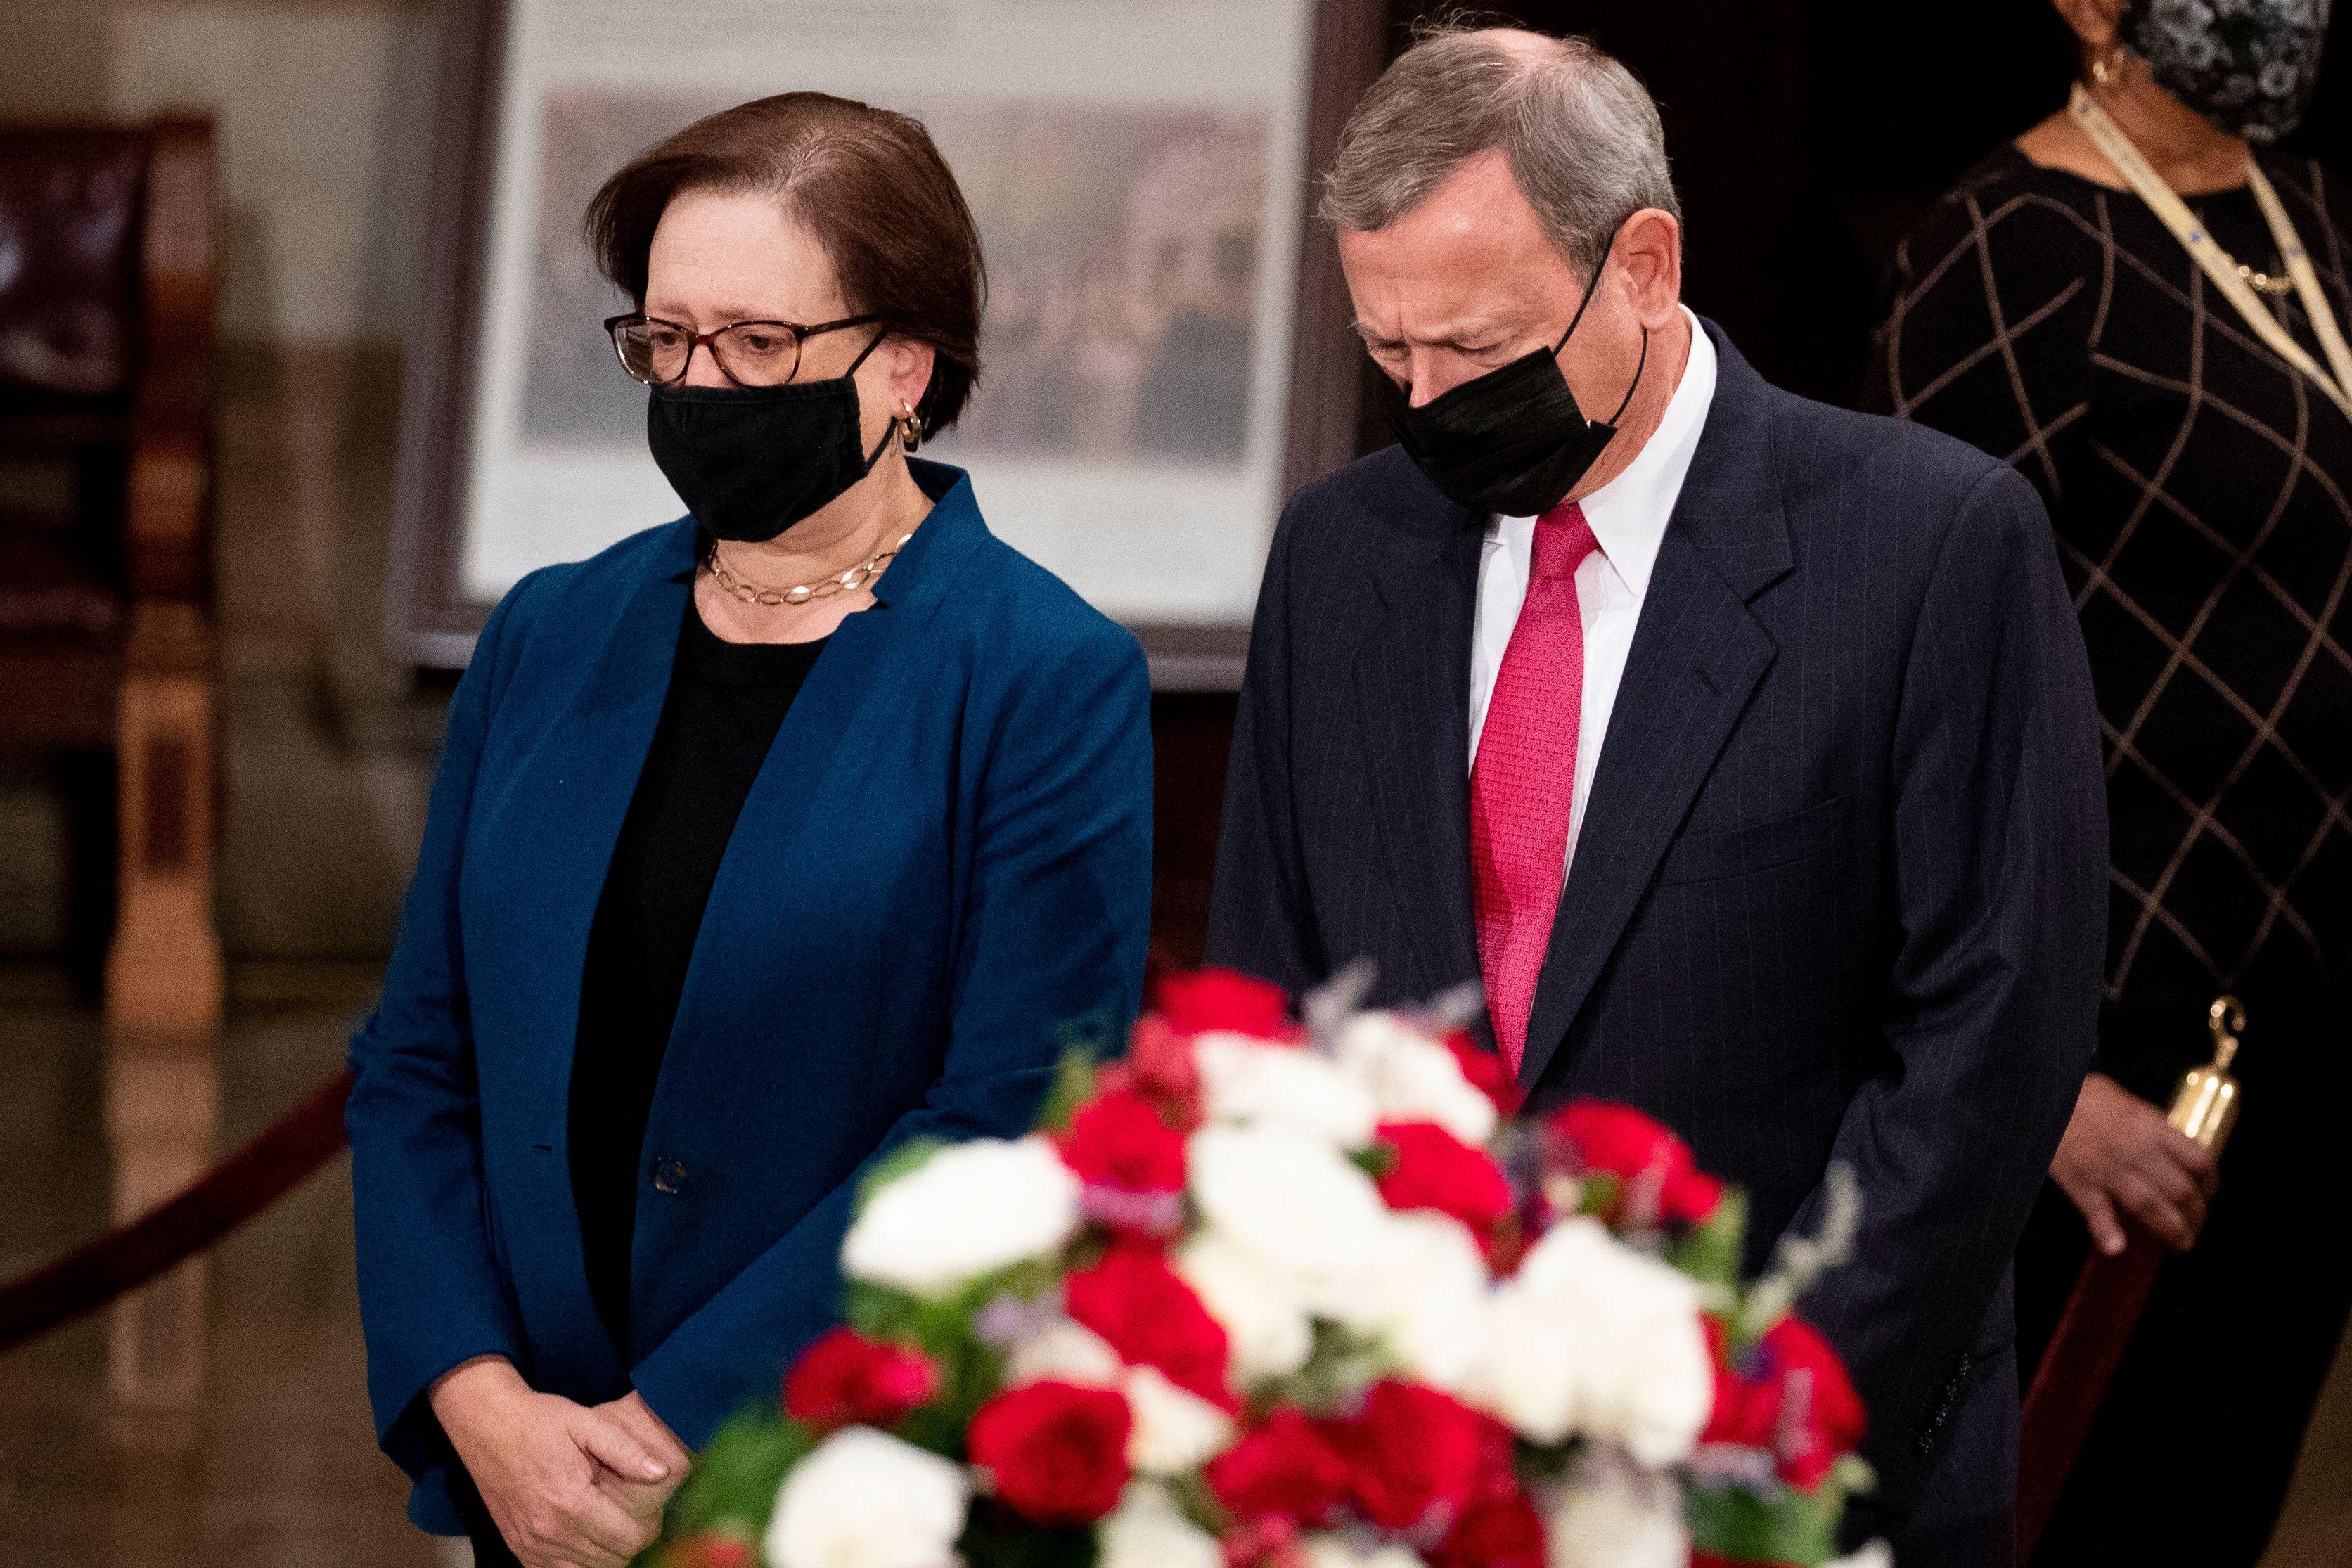 Kagan and Roberts stand in the Capitol rotunda looking mournful in black masks